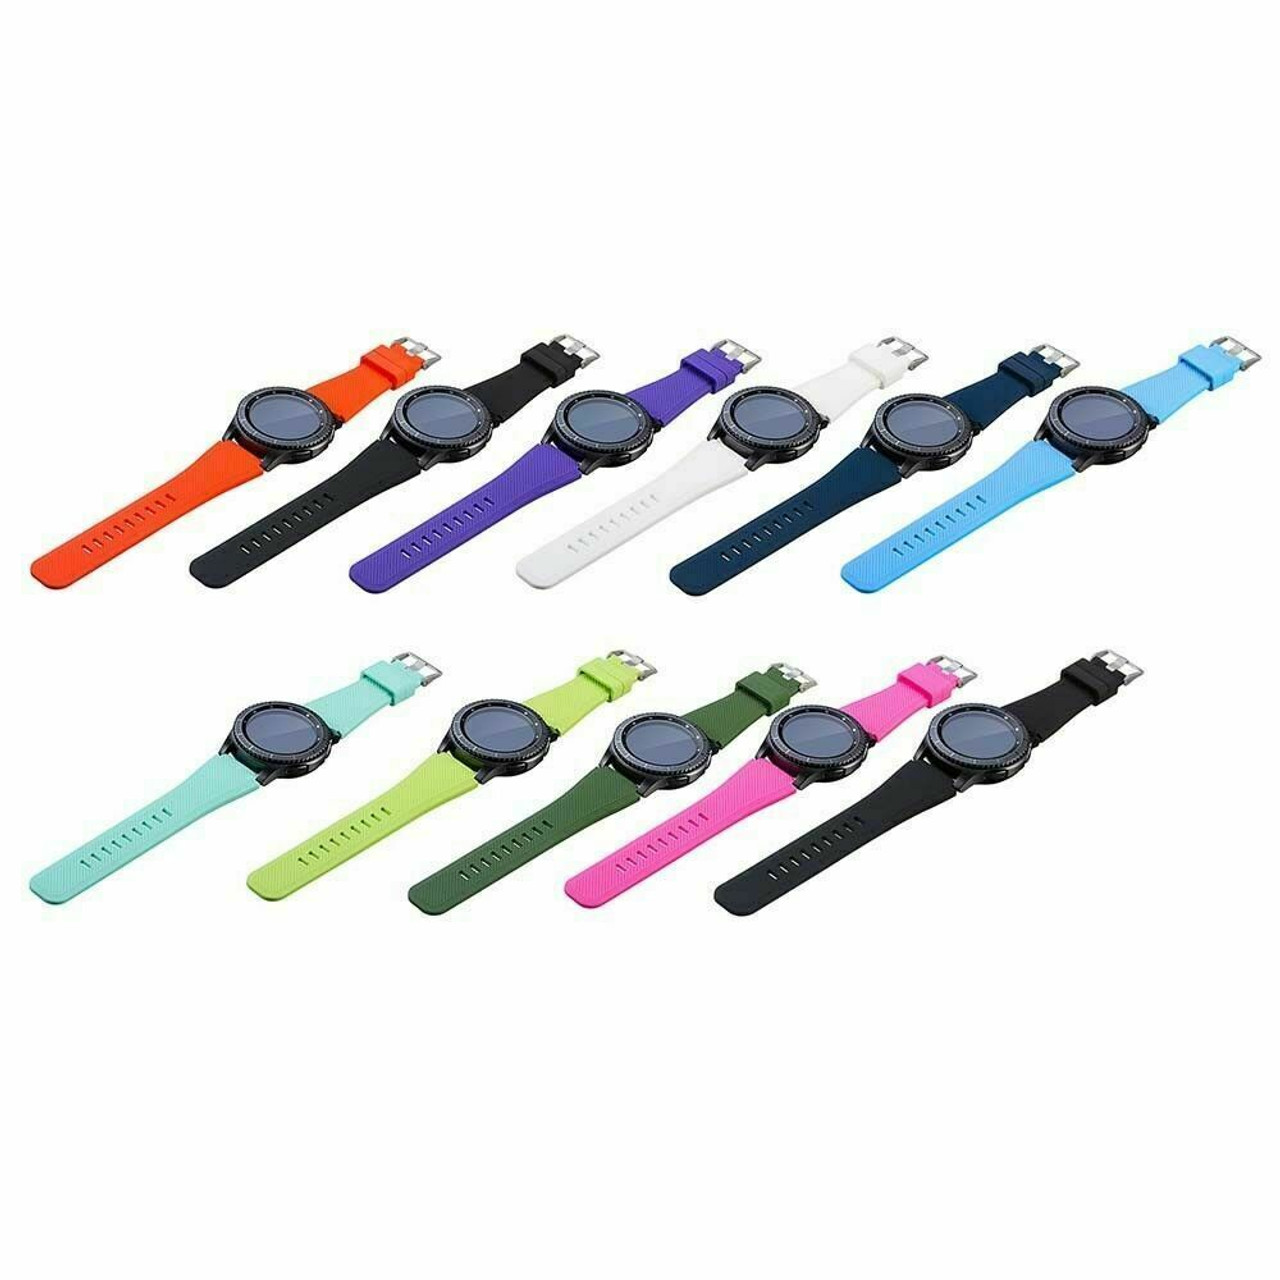 Silicone Sport Strap Watch Band For Samsung Gear Live R382, Neo R381, 2 SM- R380